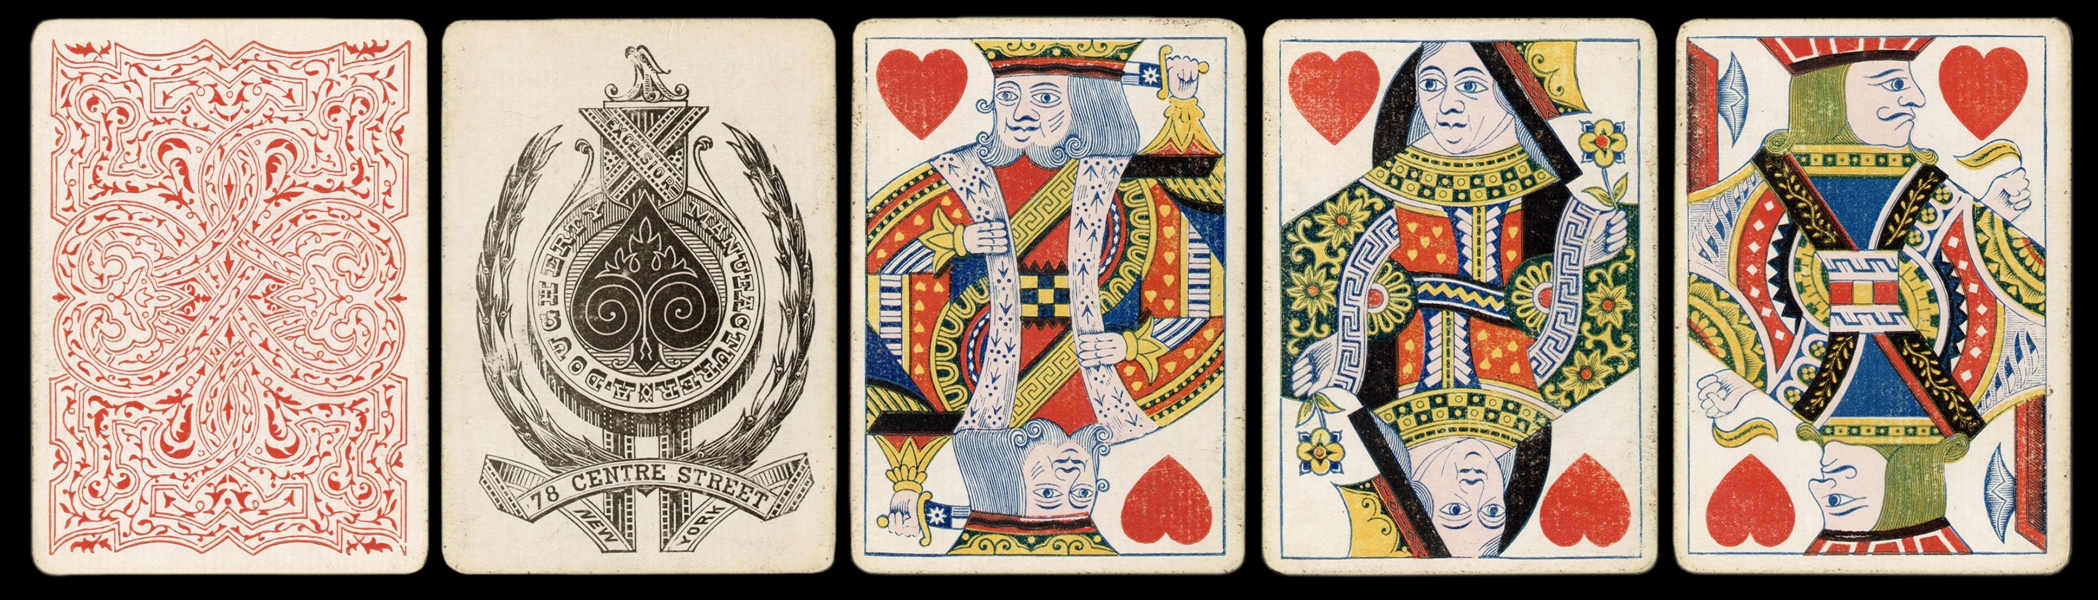  Dougherty Great Mogul Playing Cards. New York: Andrew Dough...